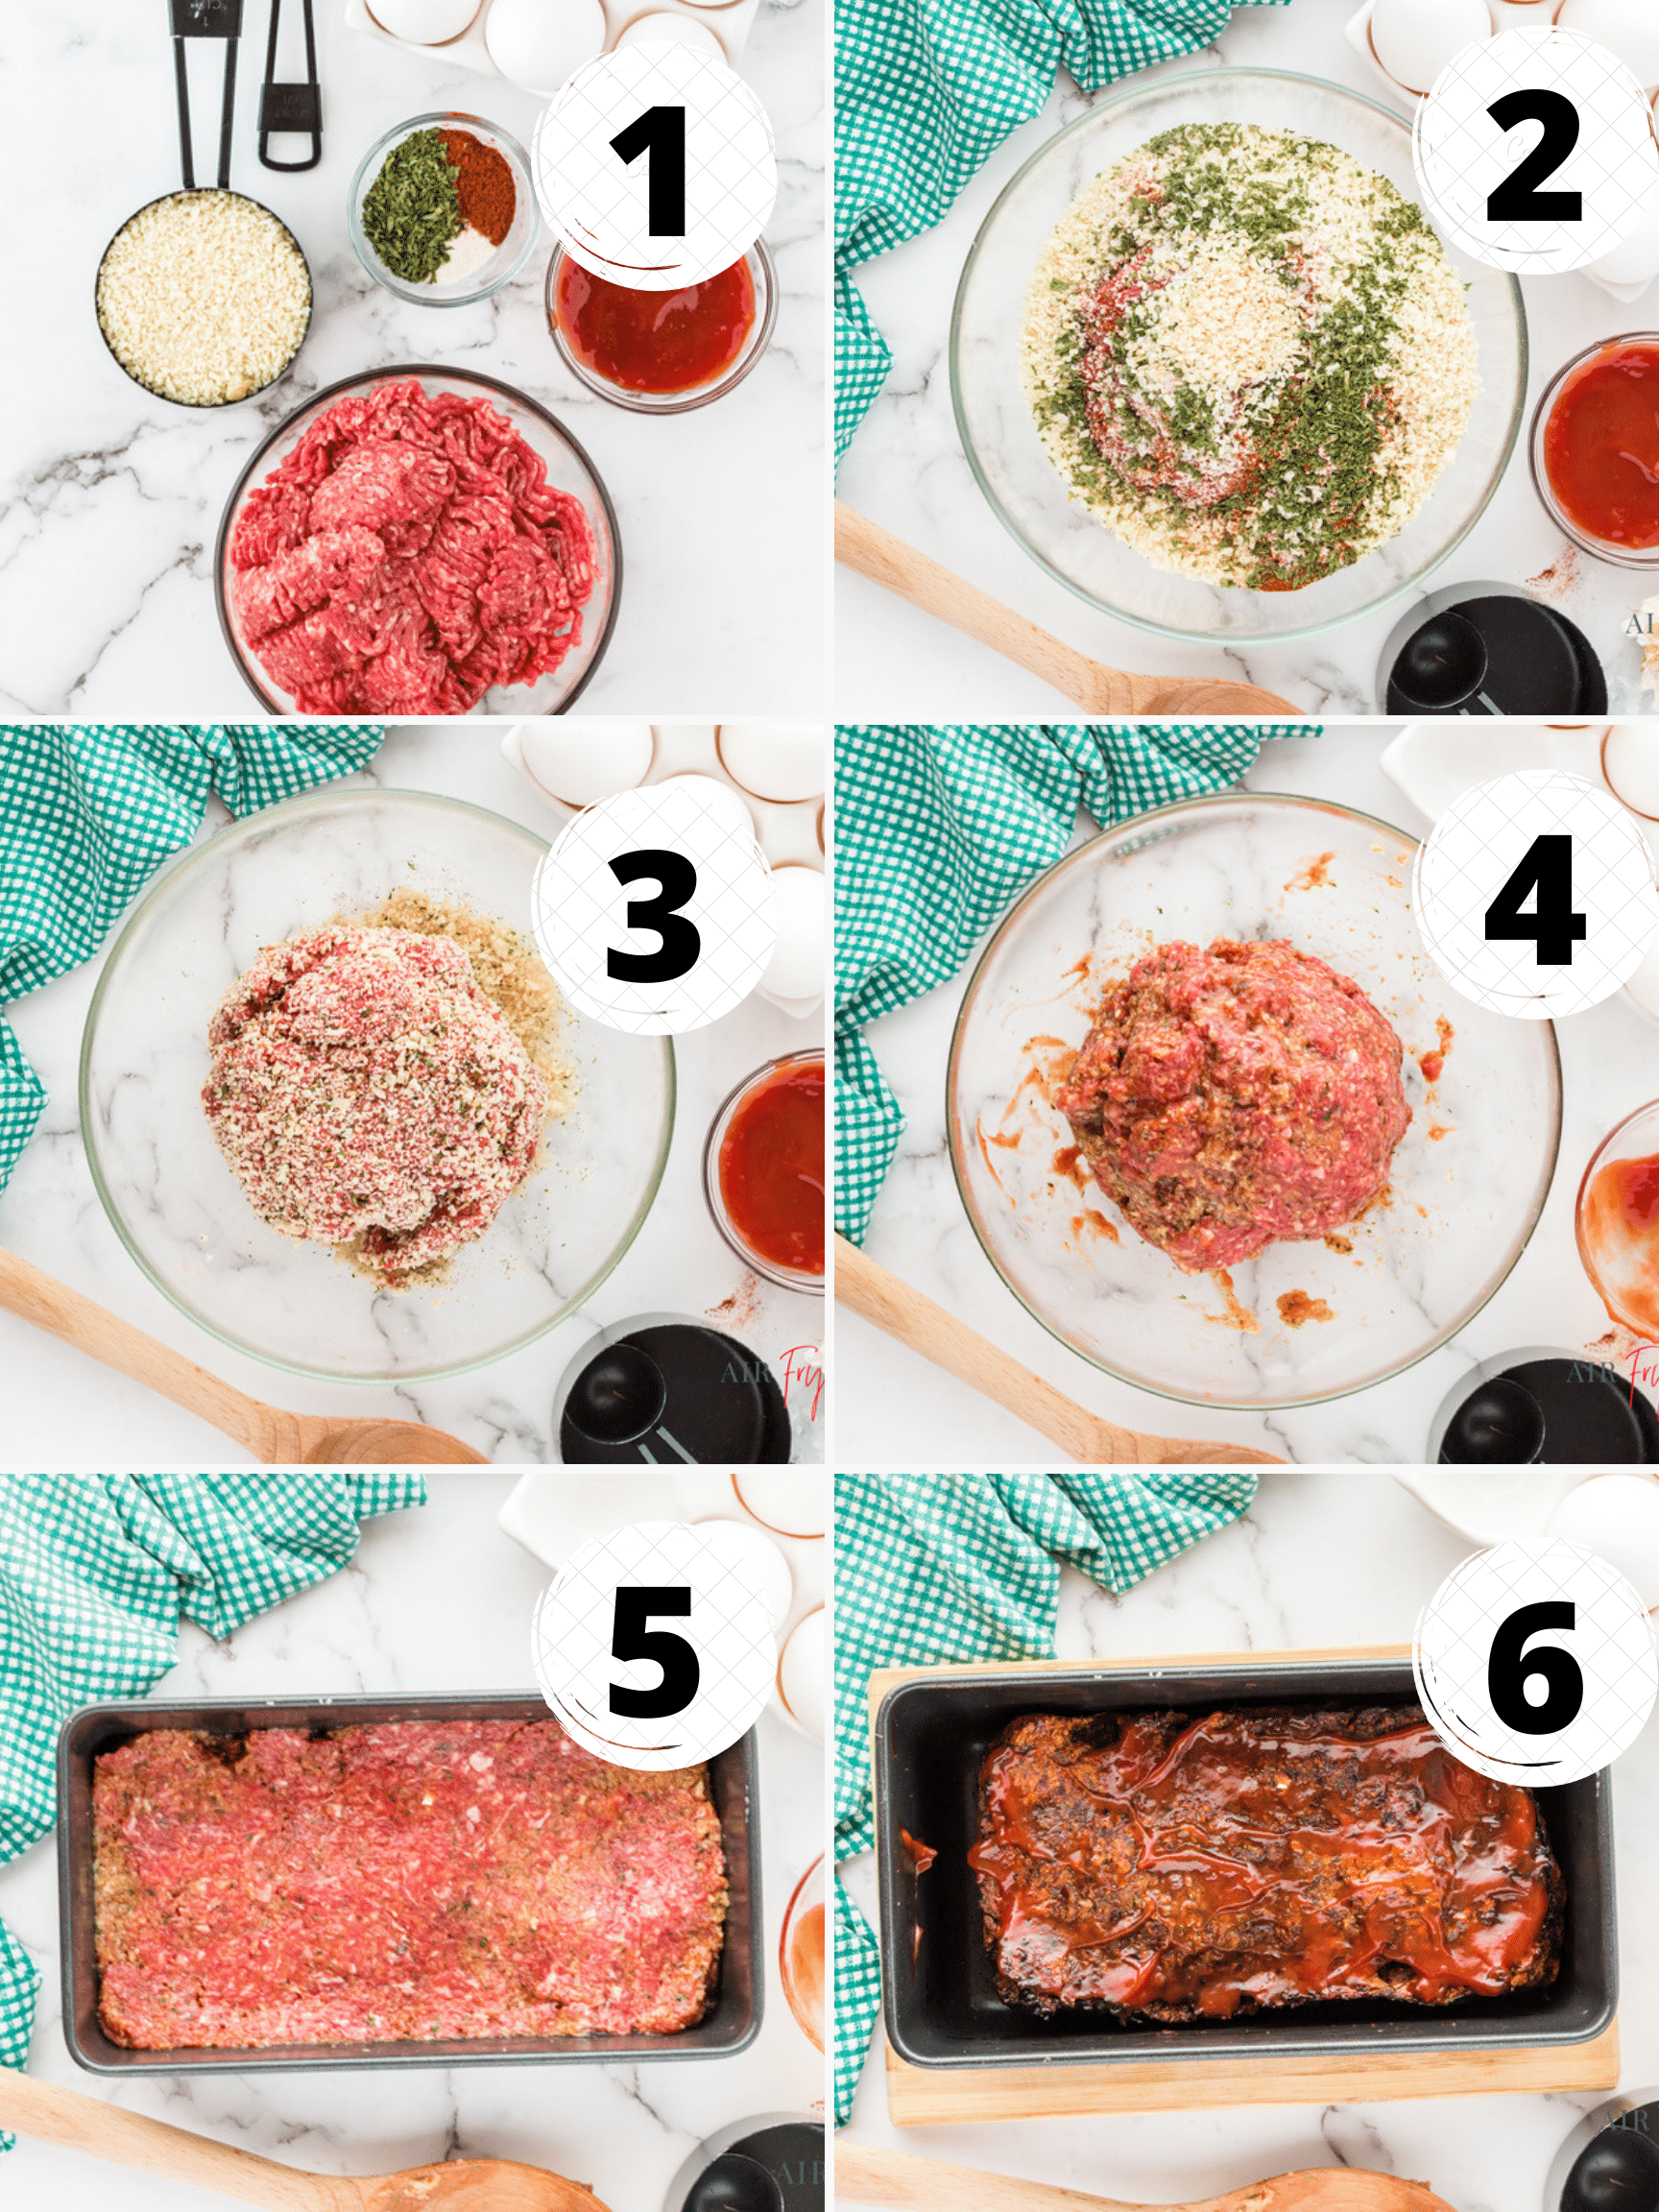 Photo collage showing 6 steps needed to cook a meatloaf in ninja foodi